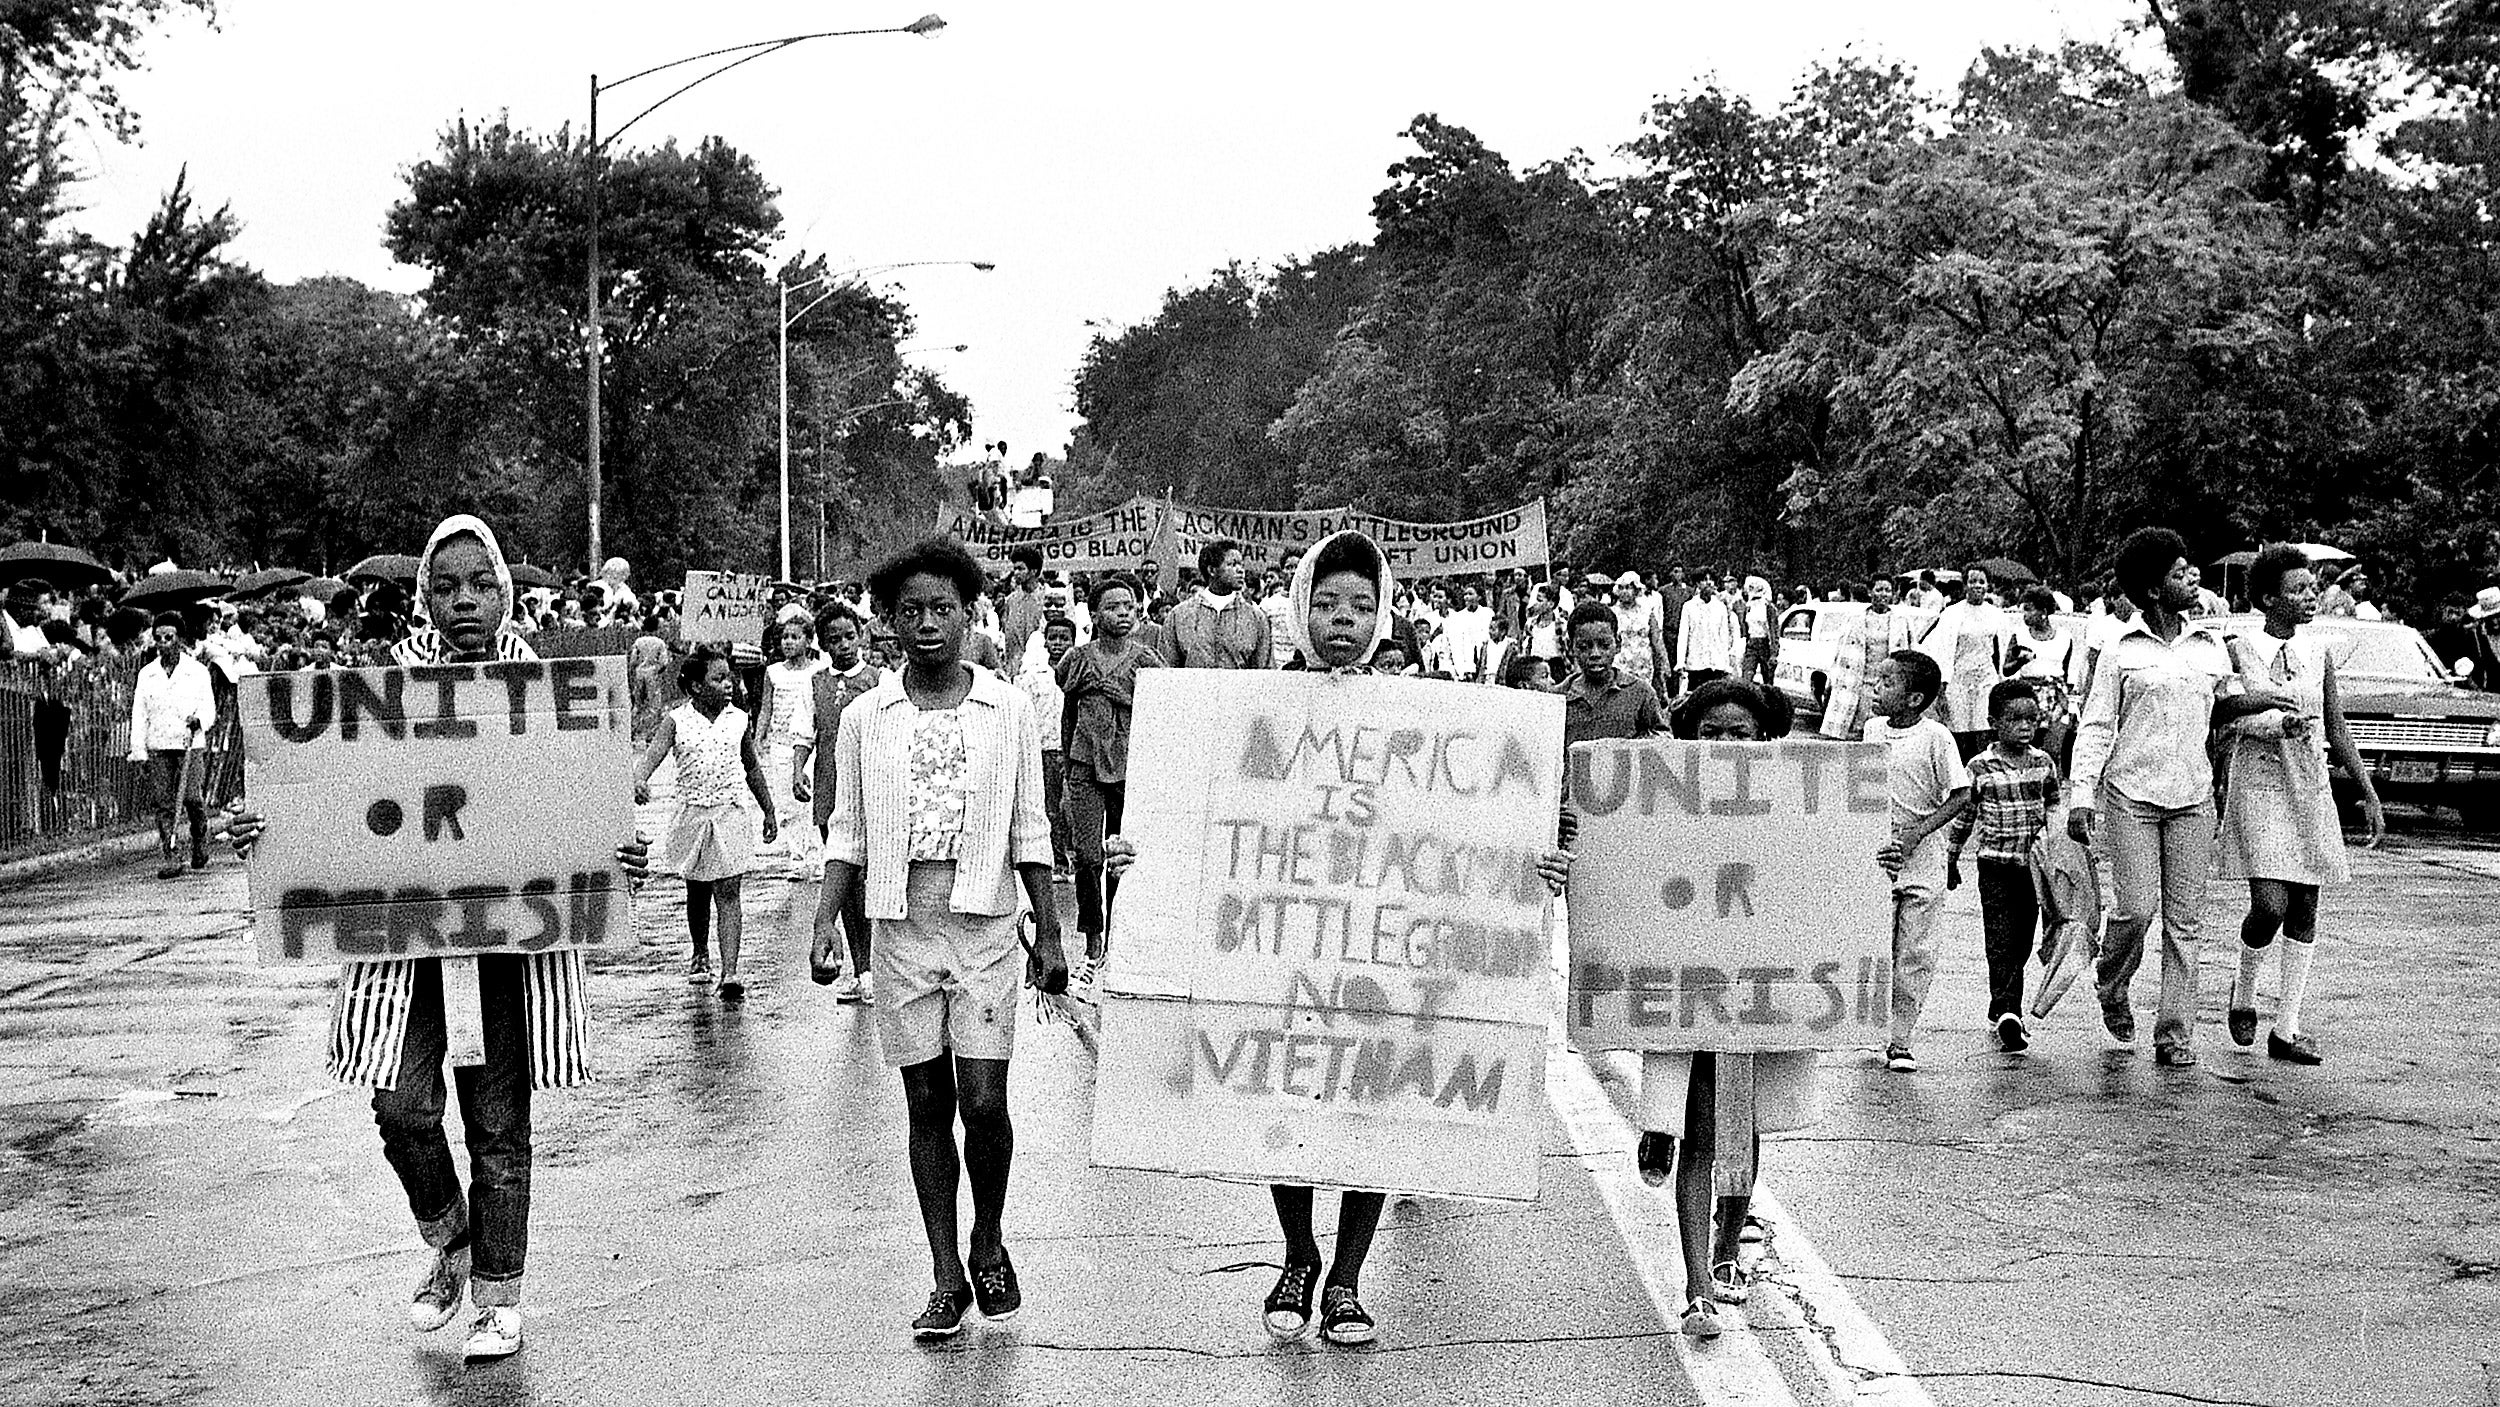 Vietnam War protesters march in Chicago in 1968 holding sign reading "Unite or perish."